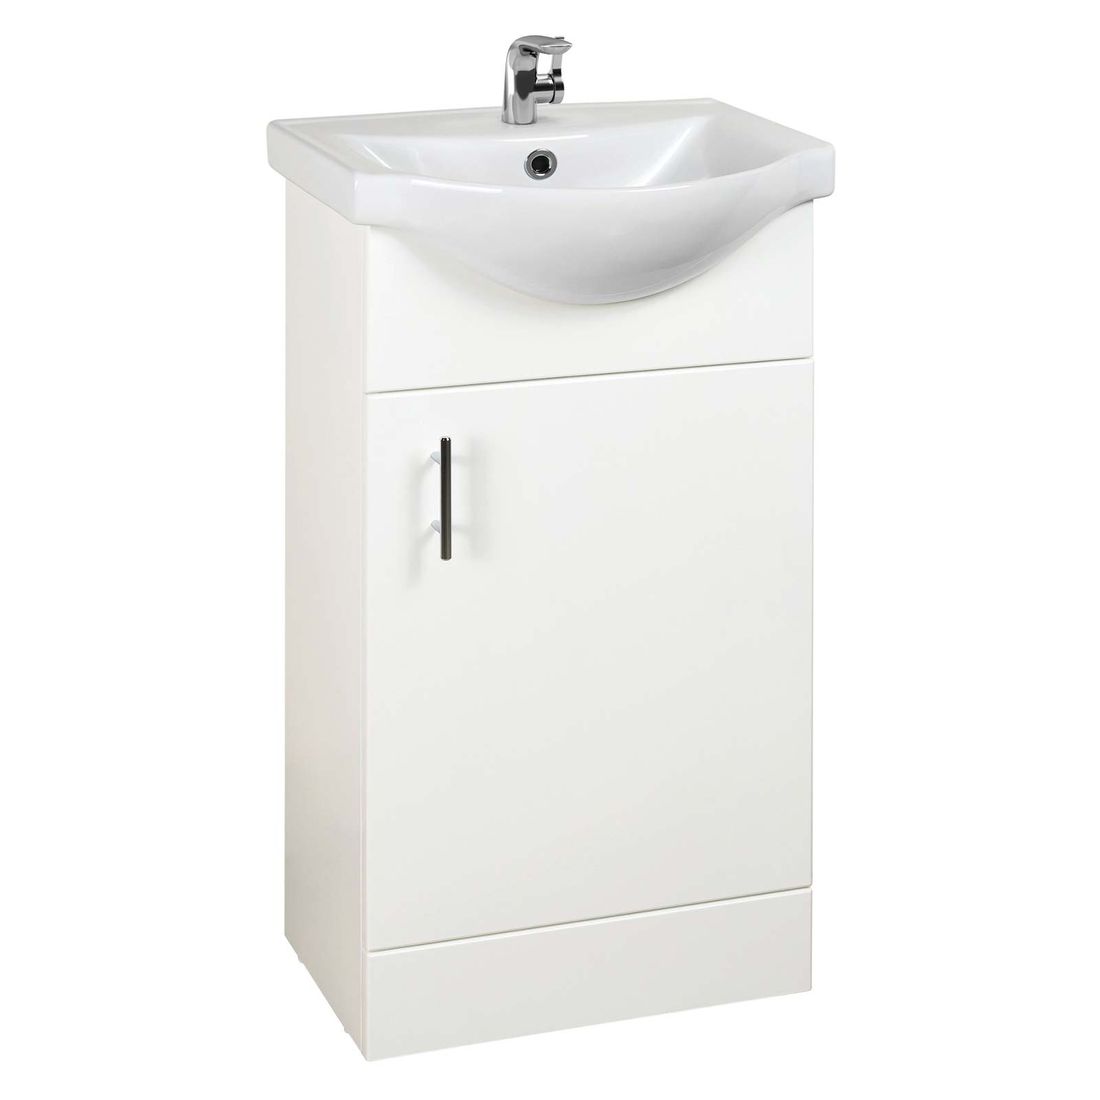 Larch 450Mm Vanity Unit Pack With Basin - White